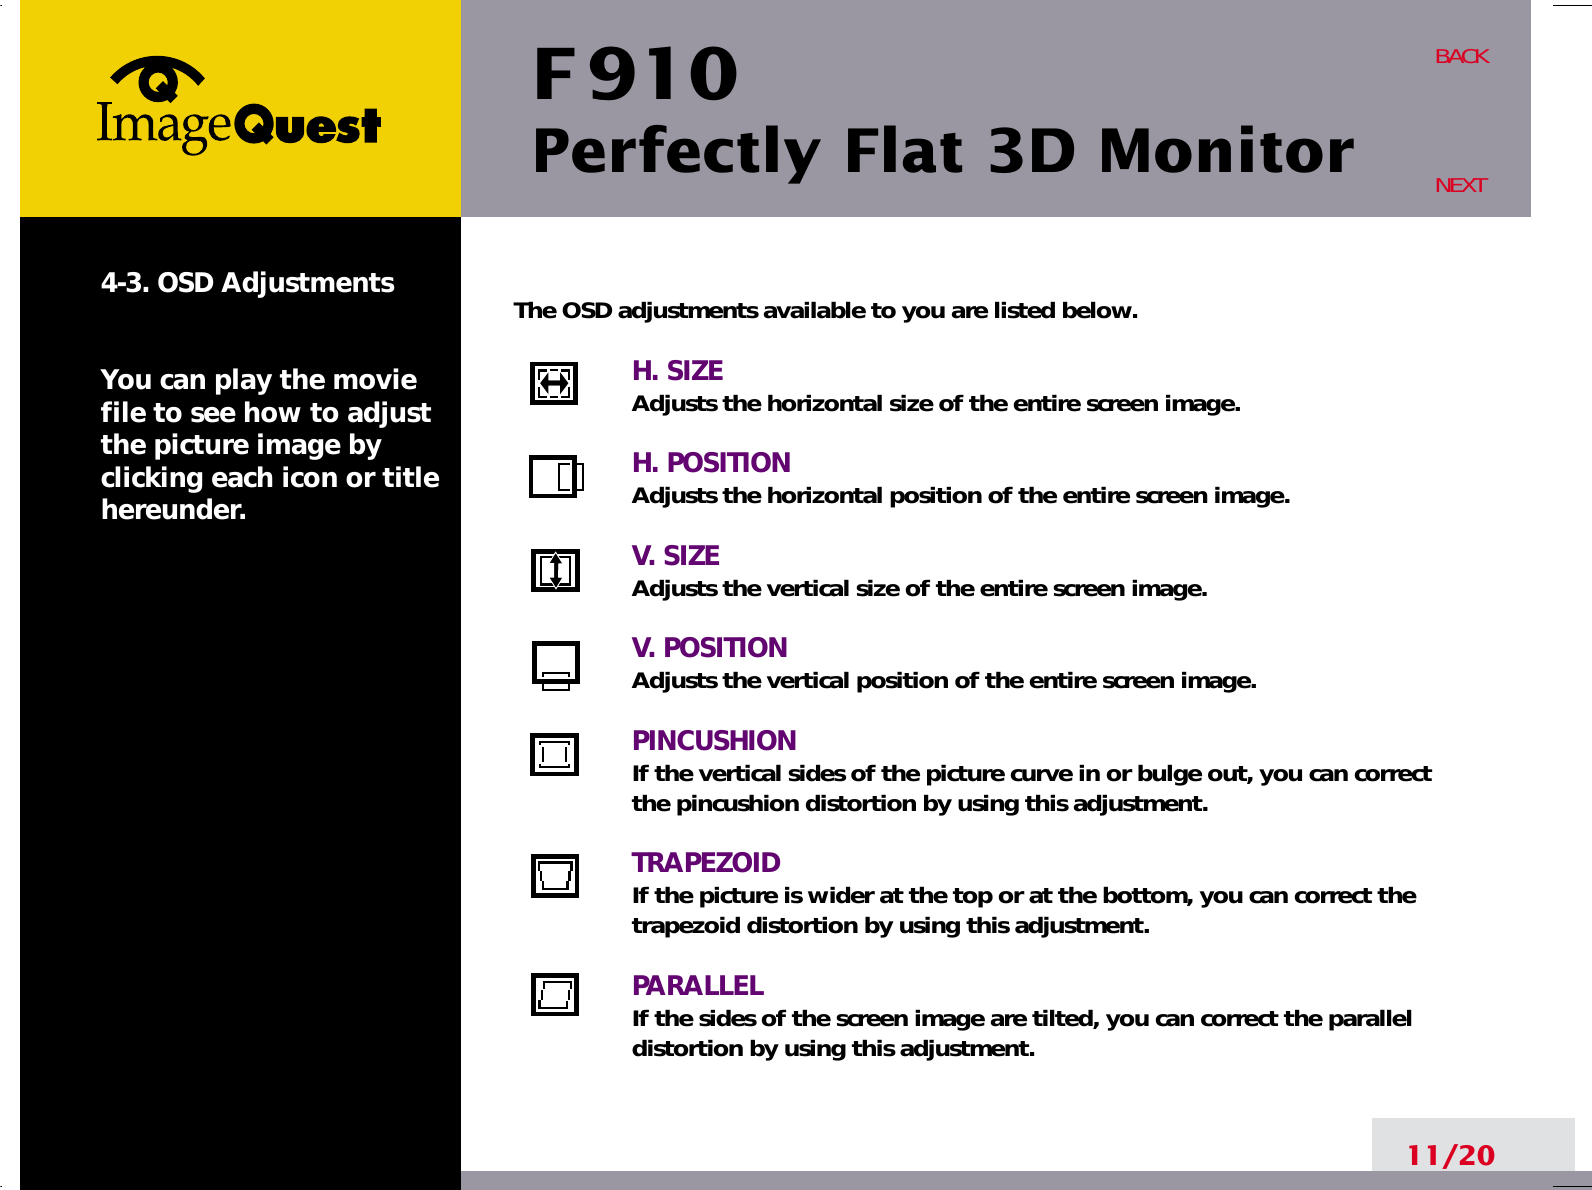 F 910Perfectly Flat 3D Monitor11/20BACKNEXT4-3. OSD AdjustmentsYou can play the moviefile to see how to adjustthe picture image byclicking each icon or titlehereunder.The OSD adjustments available to you are listed below.H. SIZEAdjusts the horizontal size of the entire screen image.H. POSITIONAdjusts the horizontal position of the entire screen image.V. SIZEAdjusts the vertical size of the entire screen image.V. POSITIONAdjusts the vertical position of the entire screen image.PINCUSHIONIf the vertical sides of the picture curve in or bulge out, you can correctthe pincushion distortion by using this adjustment.TRAPEZOIDIf the picture is wider at the top or at the bottom, you can correct thetrapezoid distortion by using this adjustment.PARALLELIf the sides of the screen image are tilted, you can correct the paralleldistortion by using this adjustment.